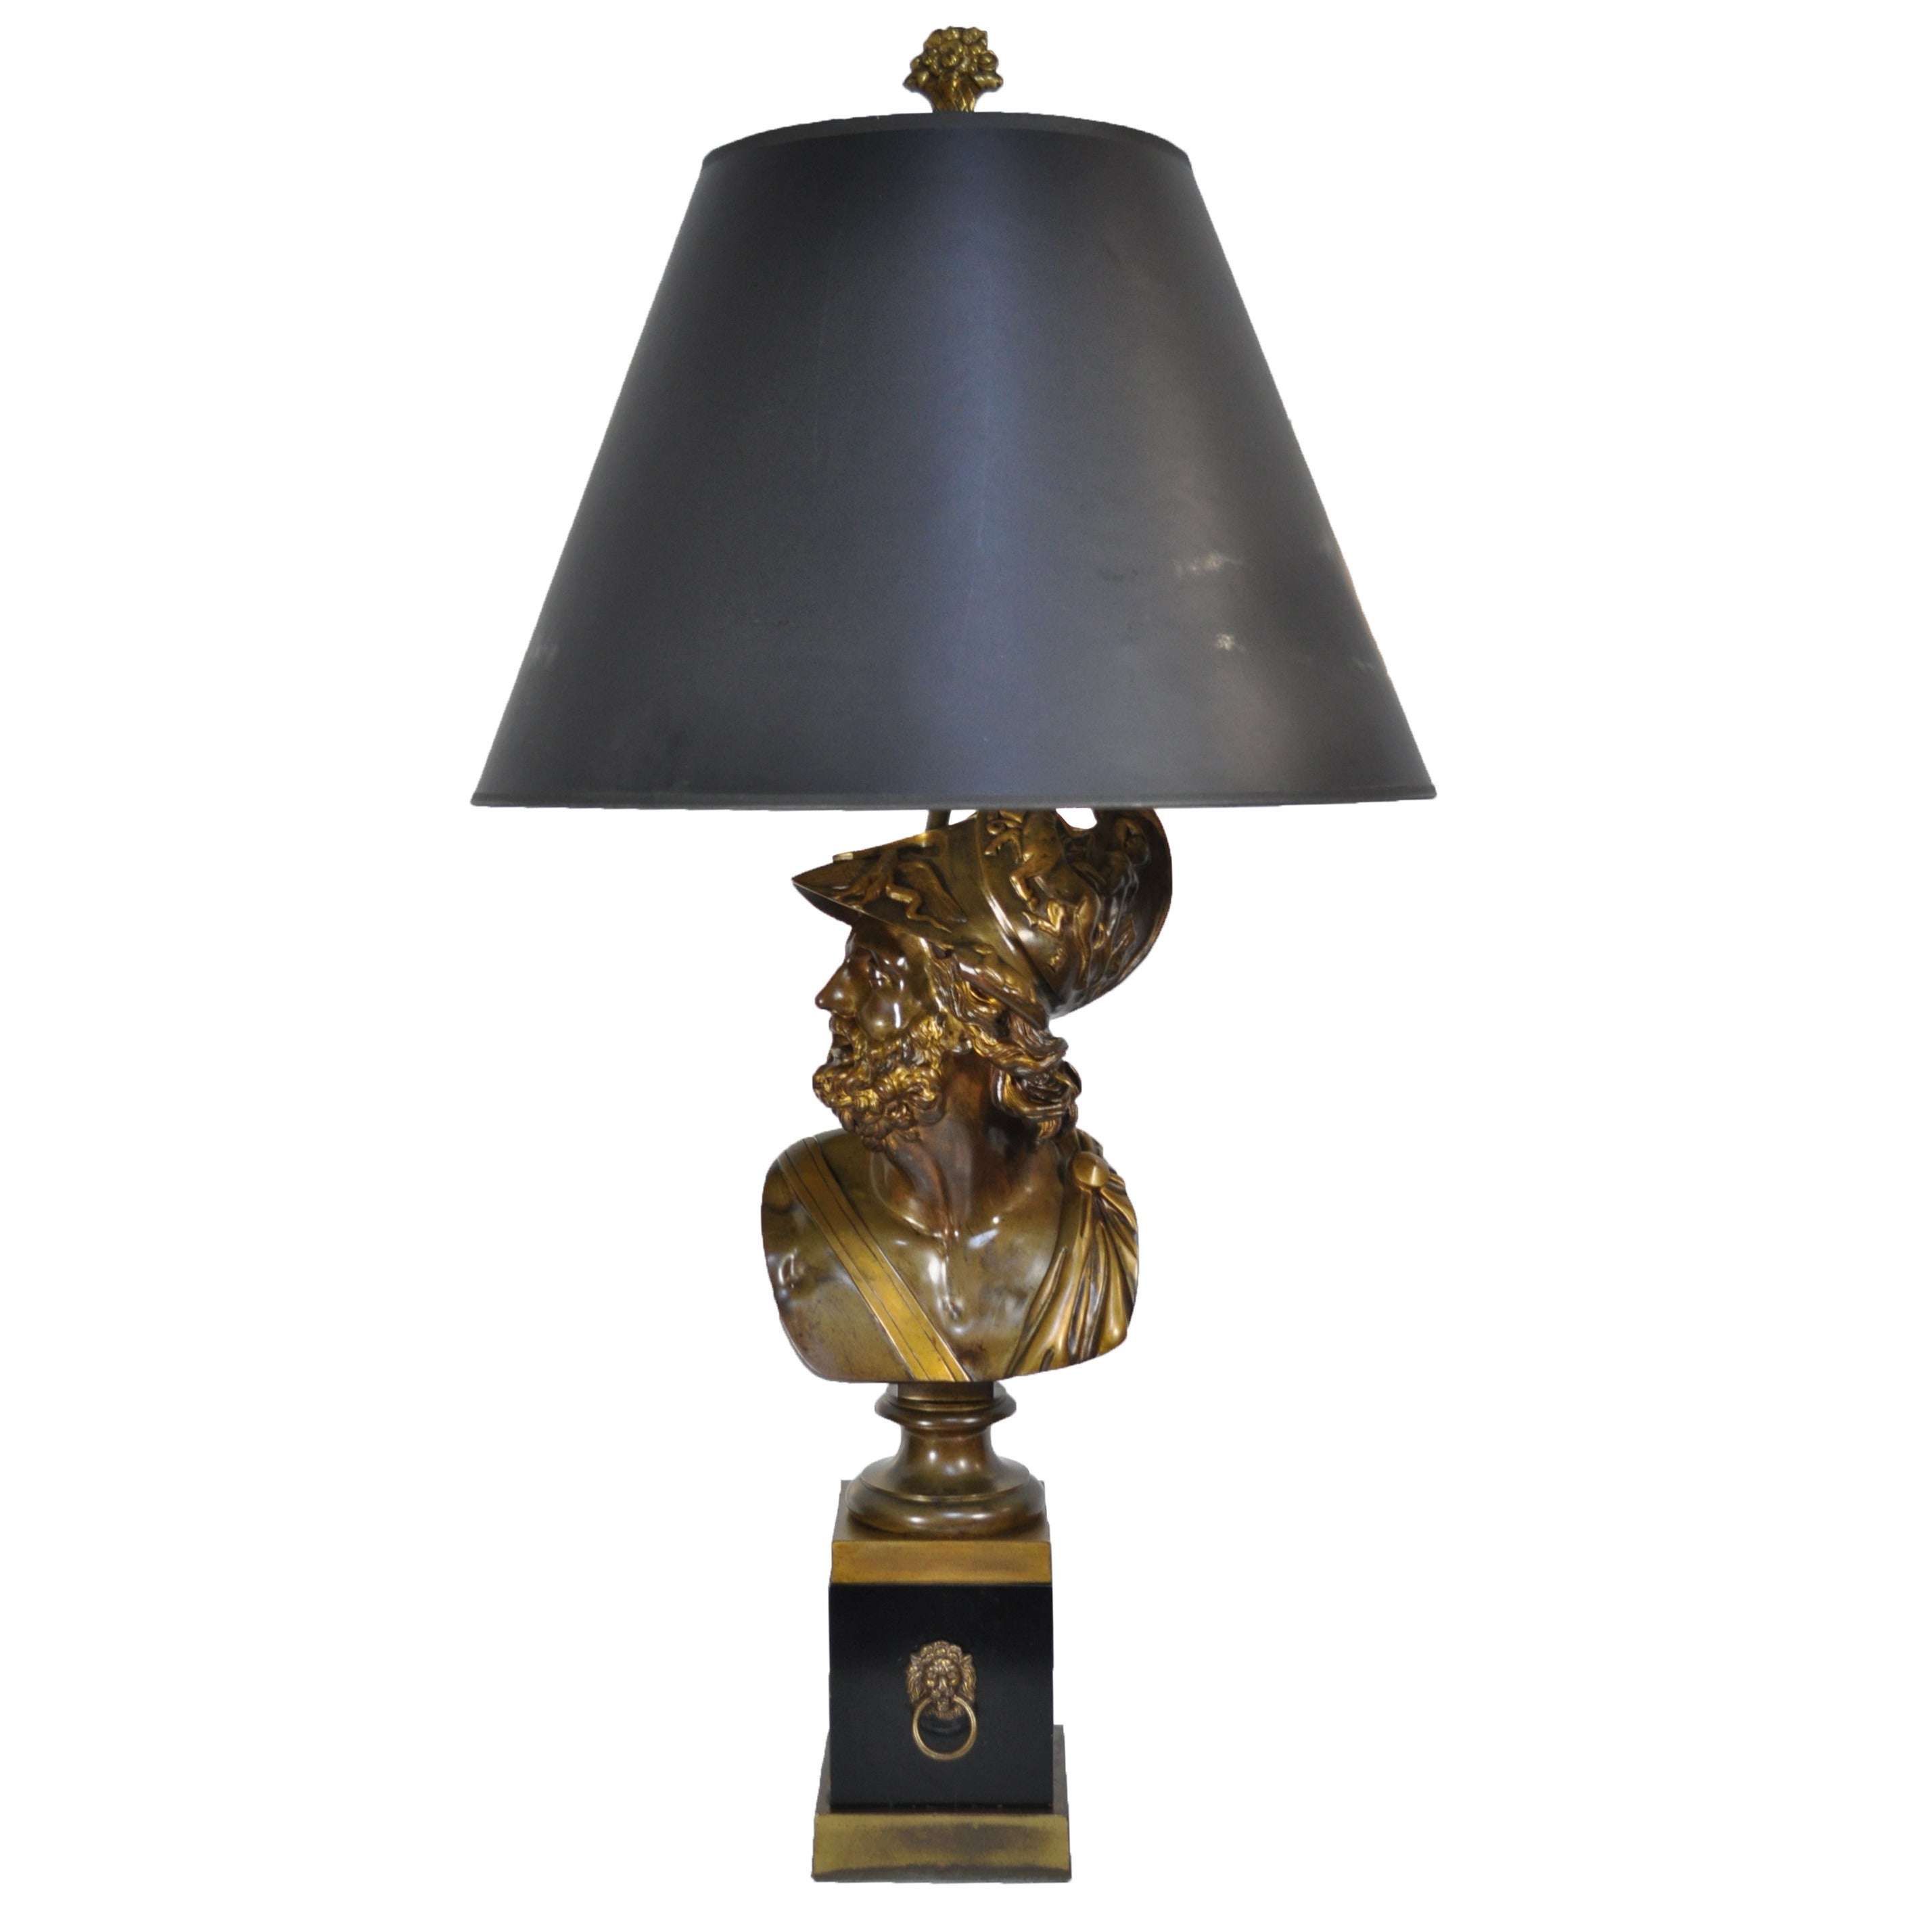 19th C Patinated Bronze French Bust of Trojan War Greek General Ajax Table Lamp For Sale